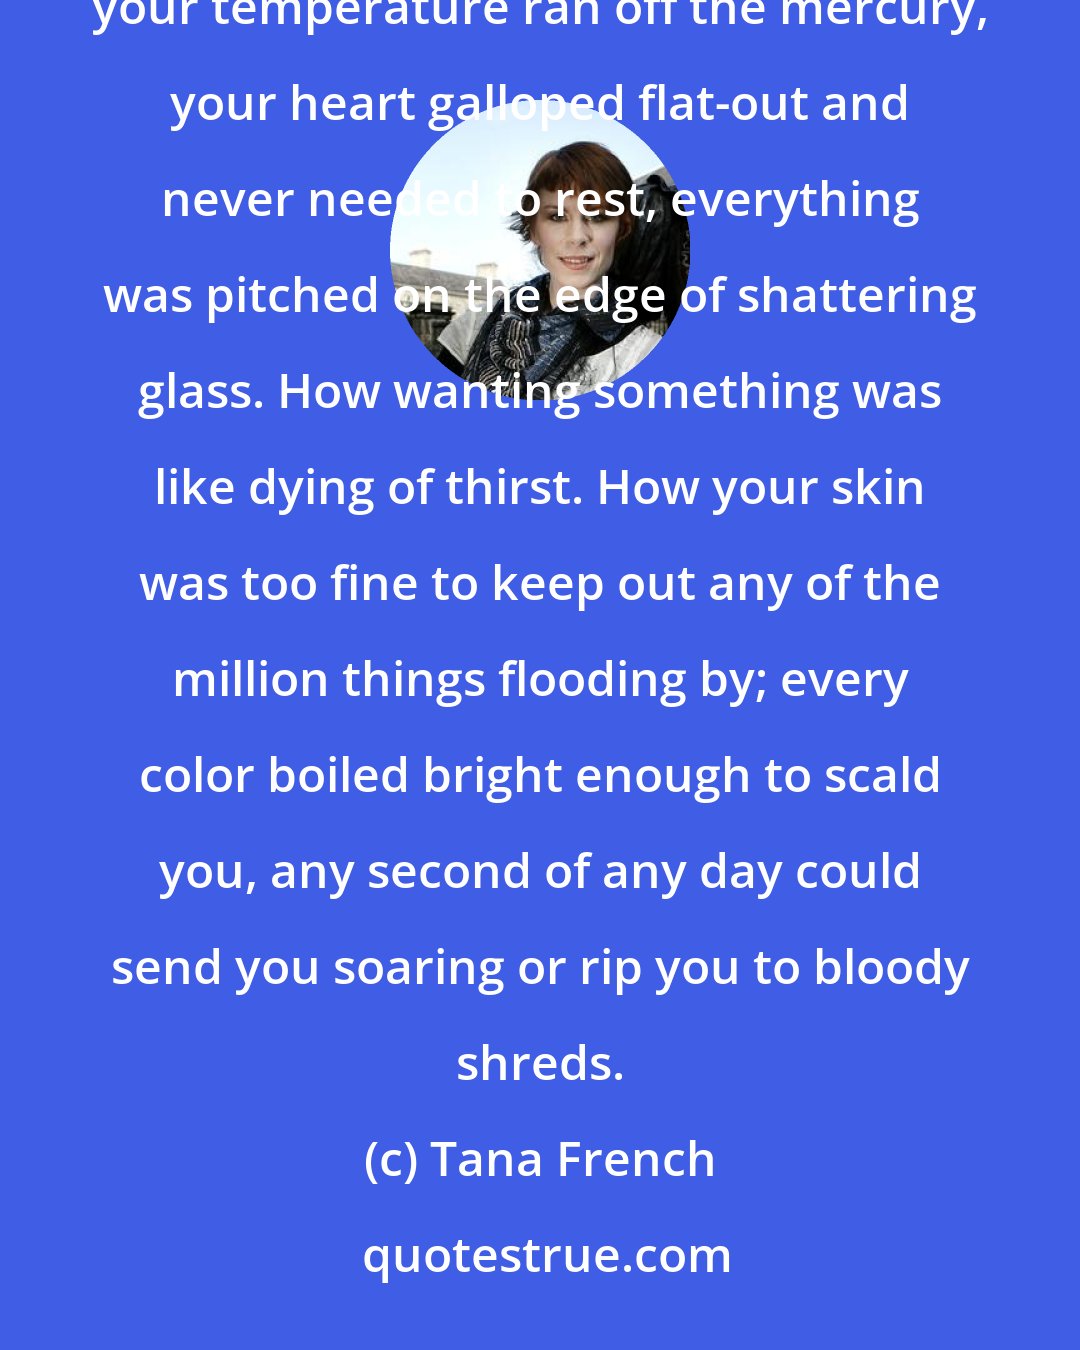 Tana French: You forget what it was like. You'd swear on your life you never will, but year by year it falls away. How your temperature ran off the mercury, your heart galloped flat-out and never needed to rest, everything was pitched on the edge of shattering glass. How wanting something was like dying of thirst. How your skin was too fine to keep out any of the million things flooding by; every color boiled bright enough to scald you, any second of any day could send you soaring or rip you to bloody shreds.